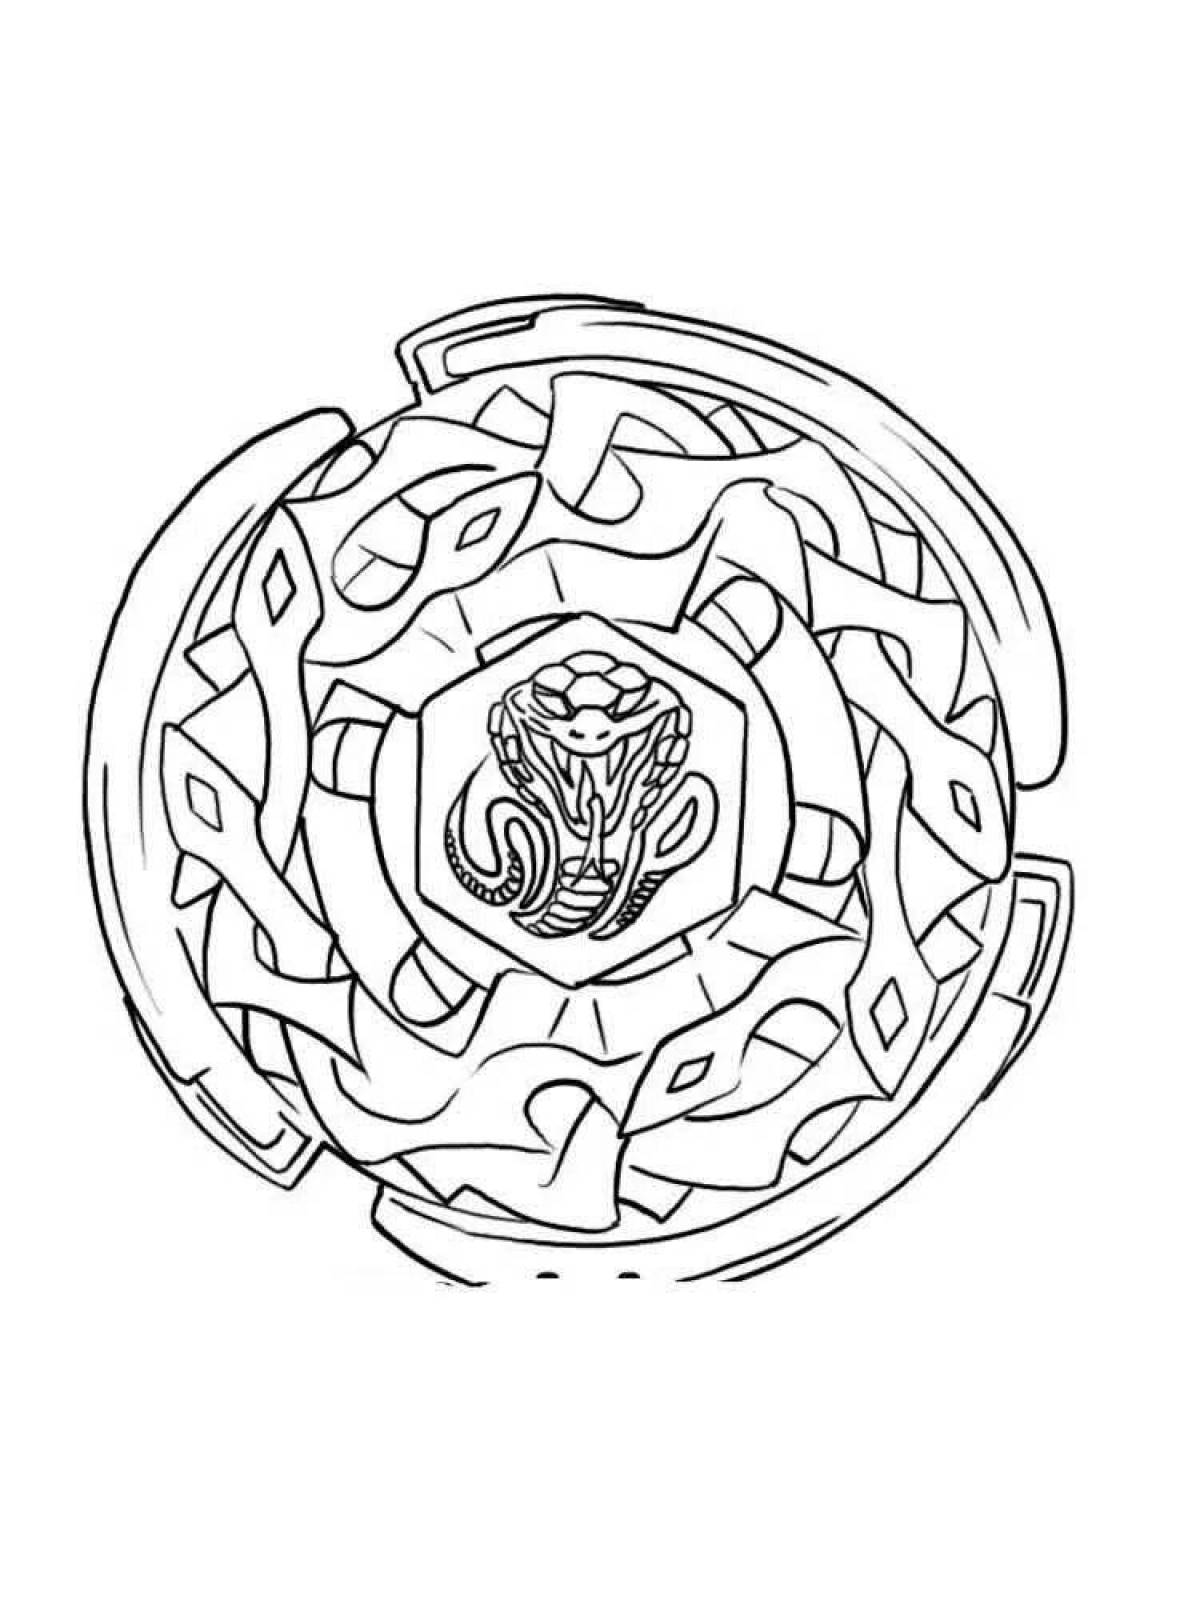 Bright beyblade coloring page